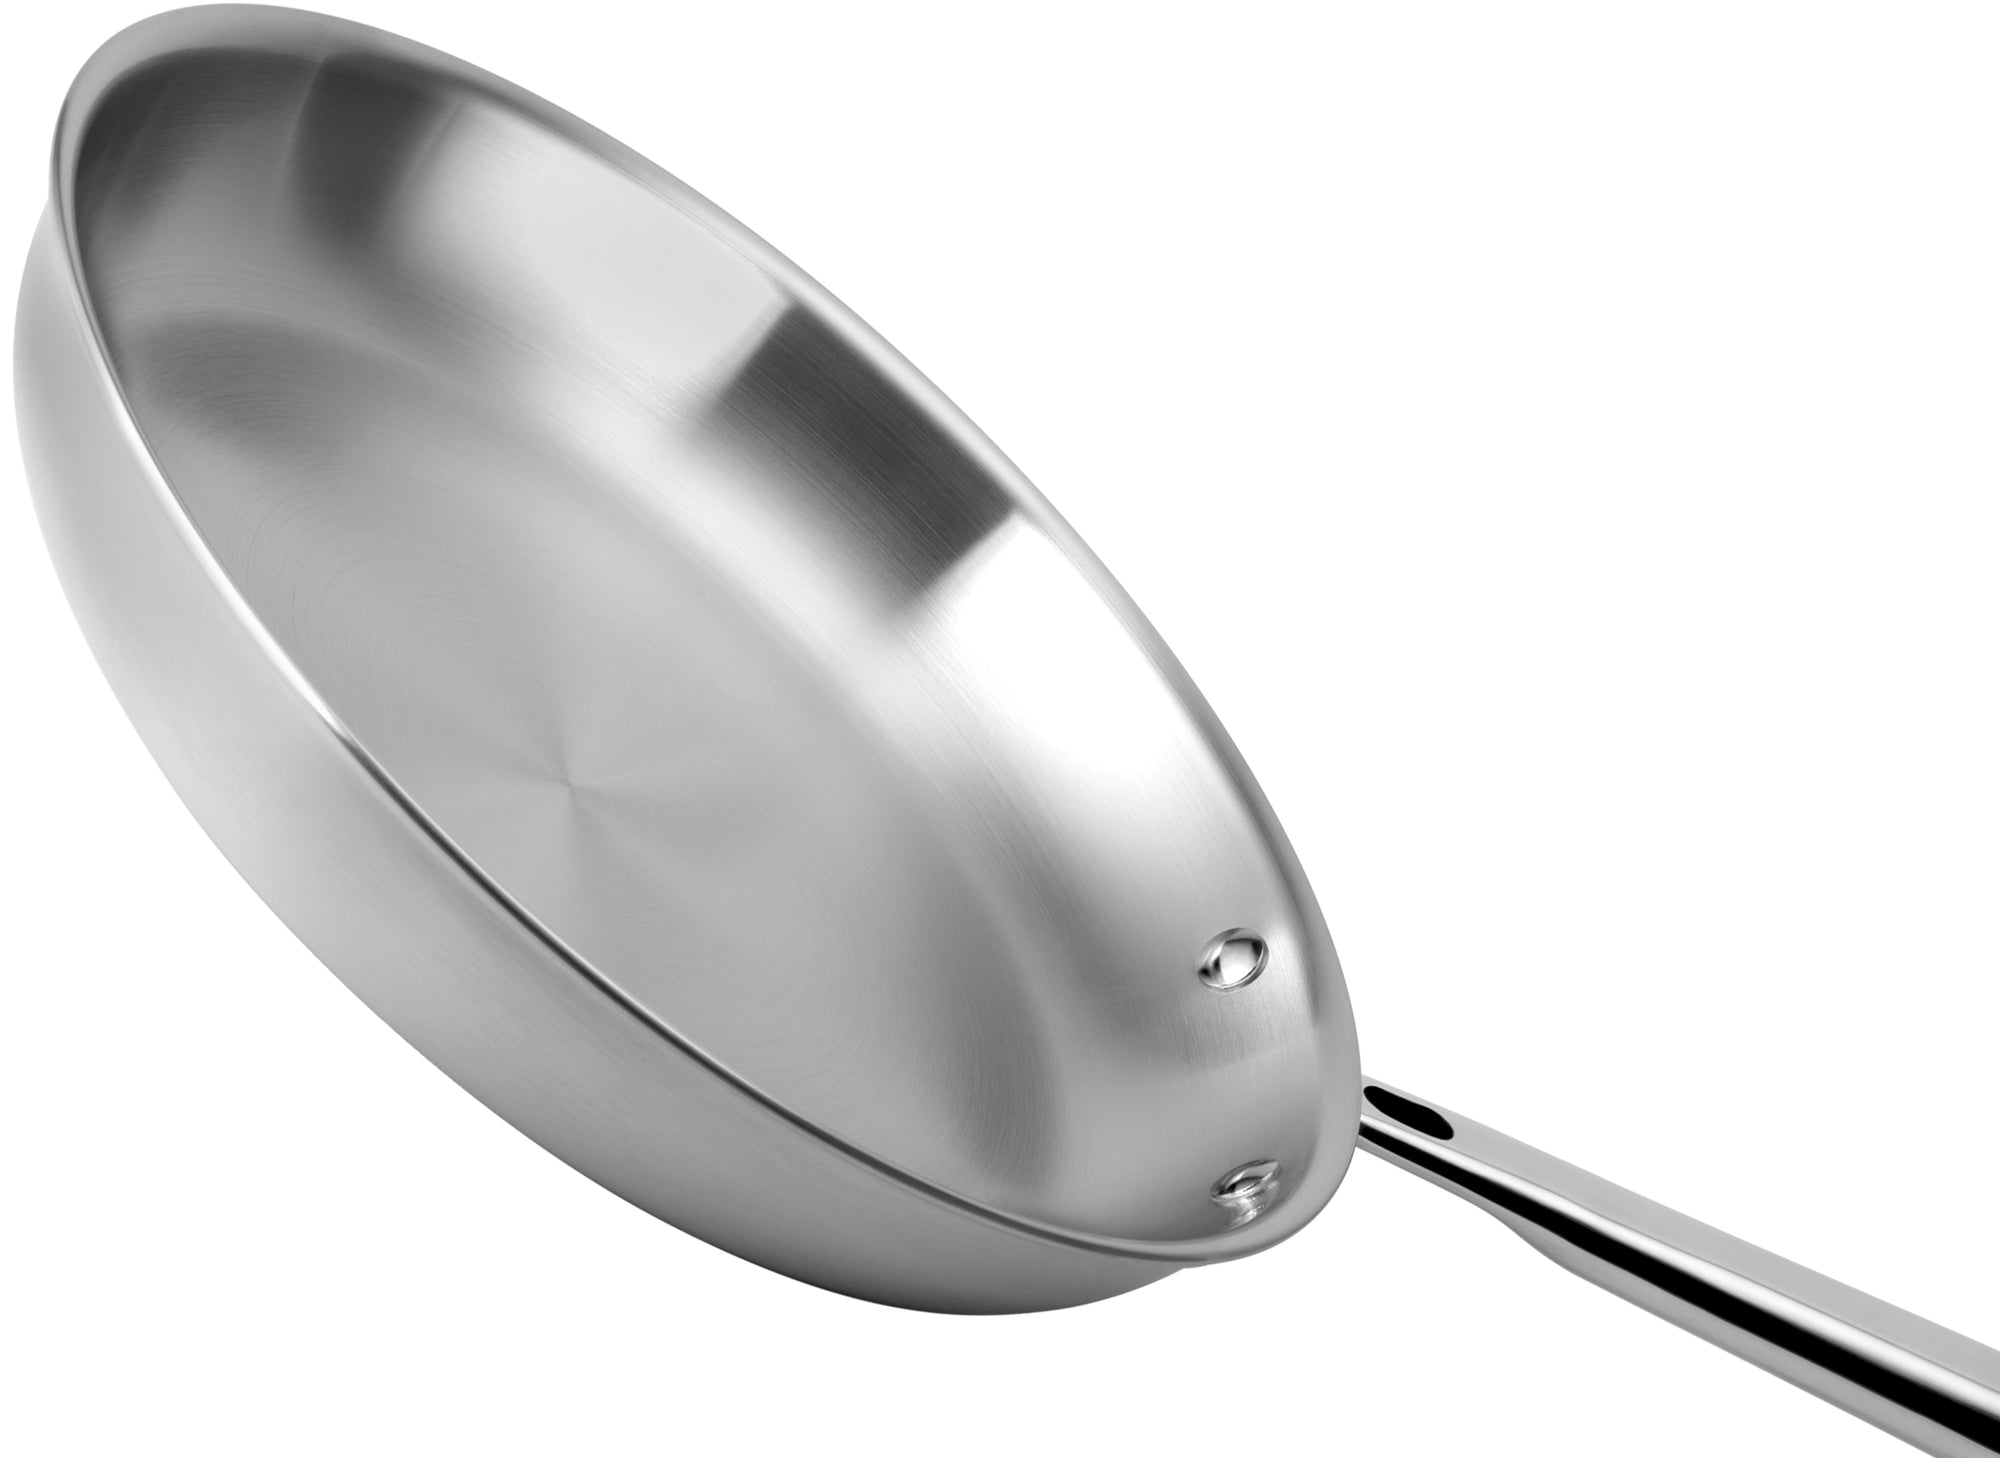 The 12 inch Misen Stainless Skillet has a steel quality surface, is highly durable and rust resistant.